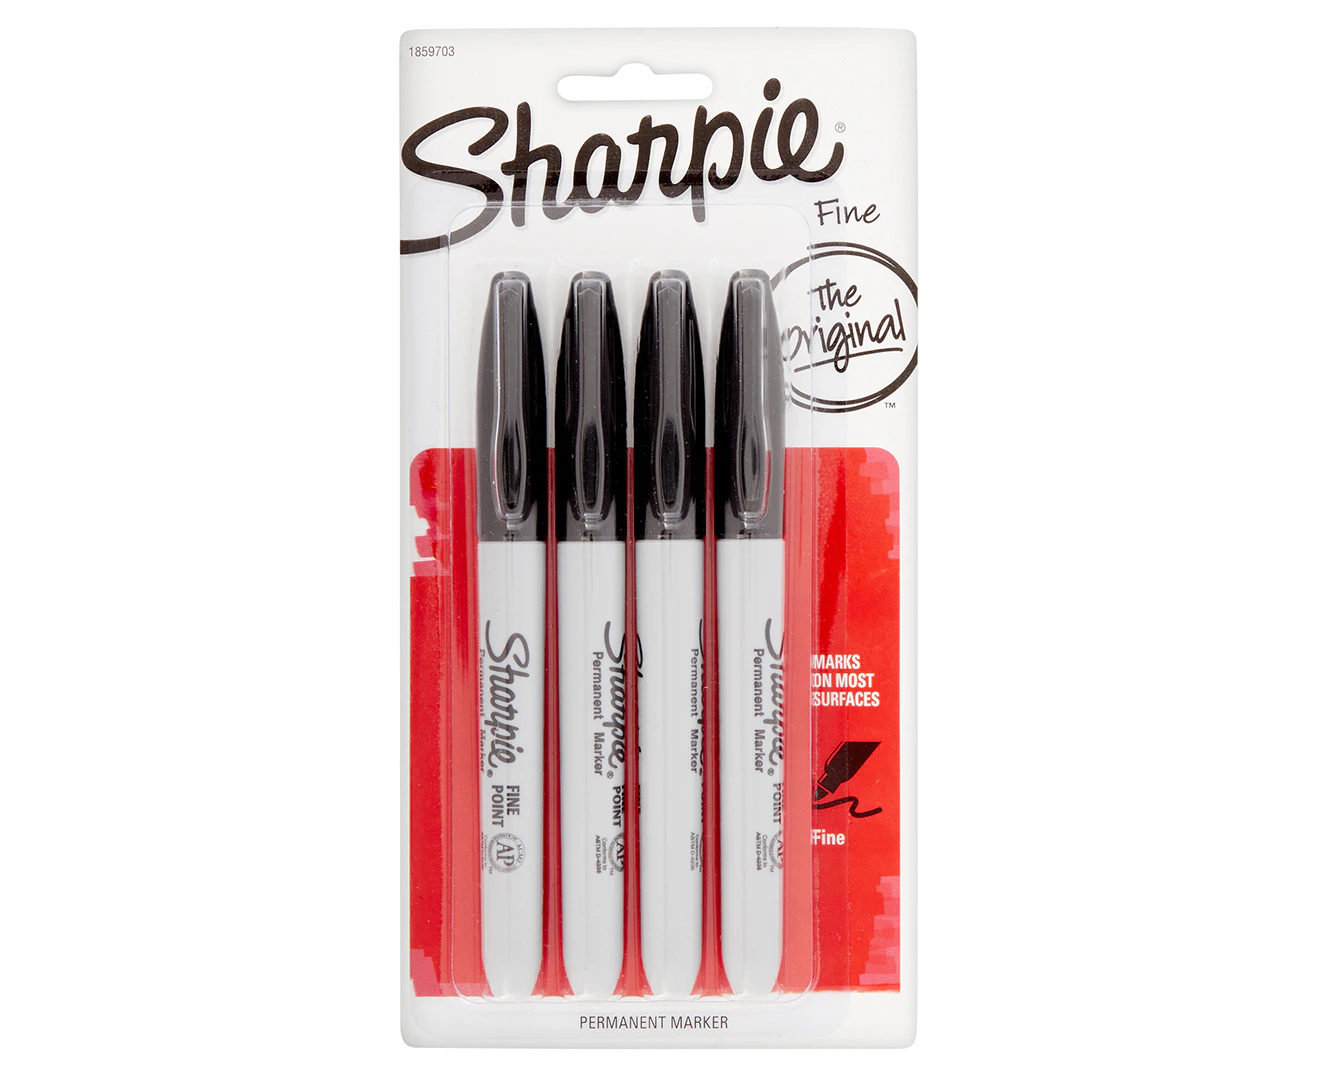 Bulk Sharpies available now at our MASSIVE online sale!